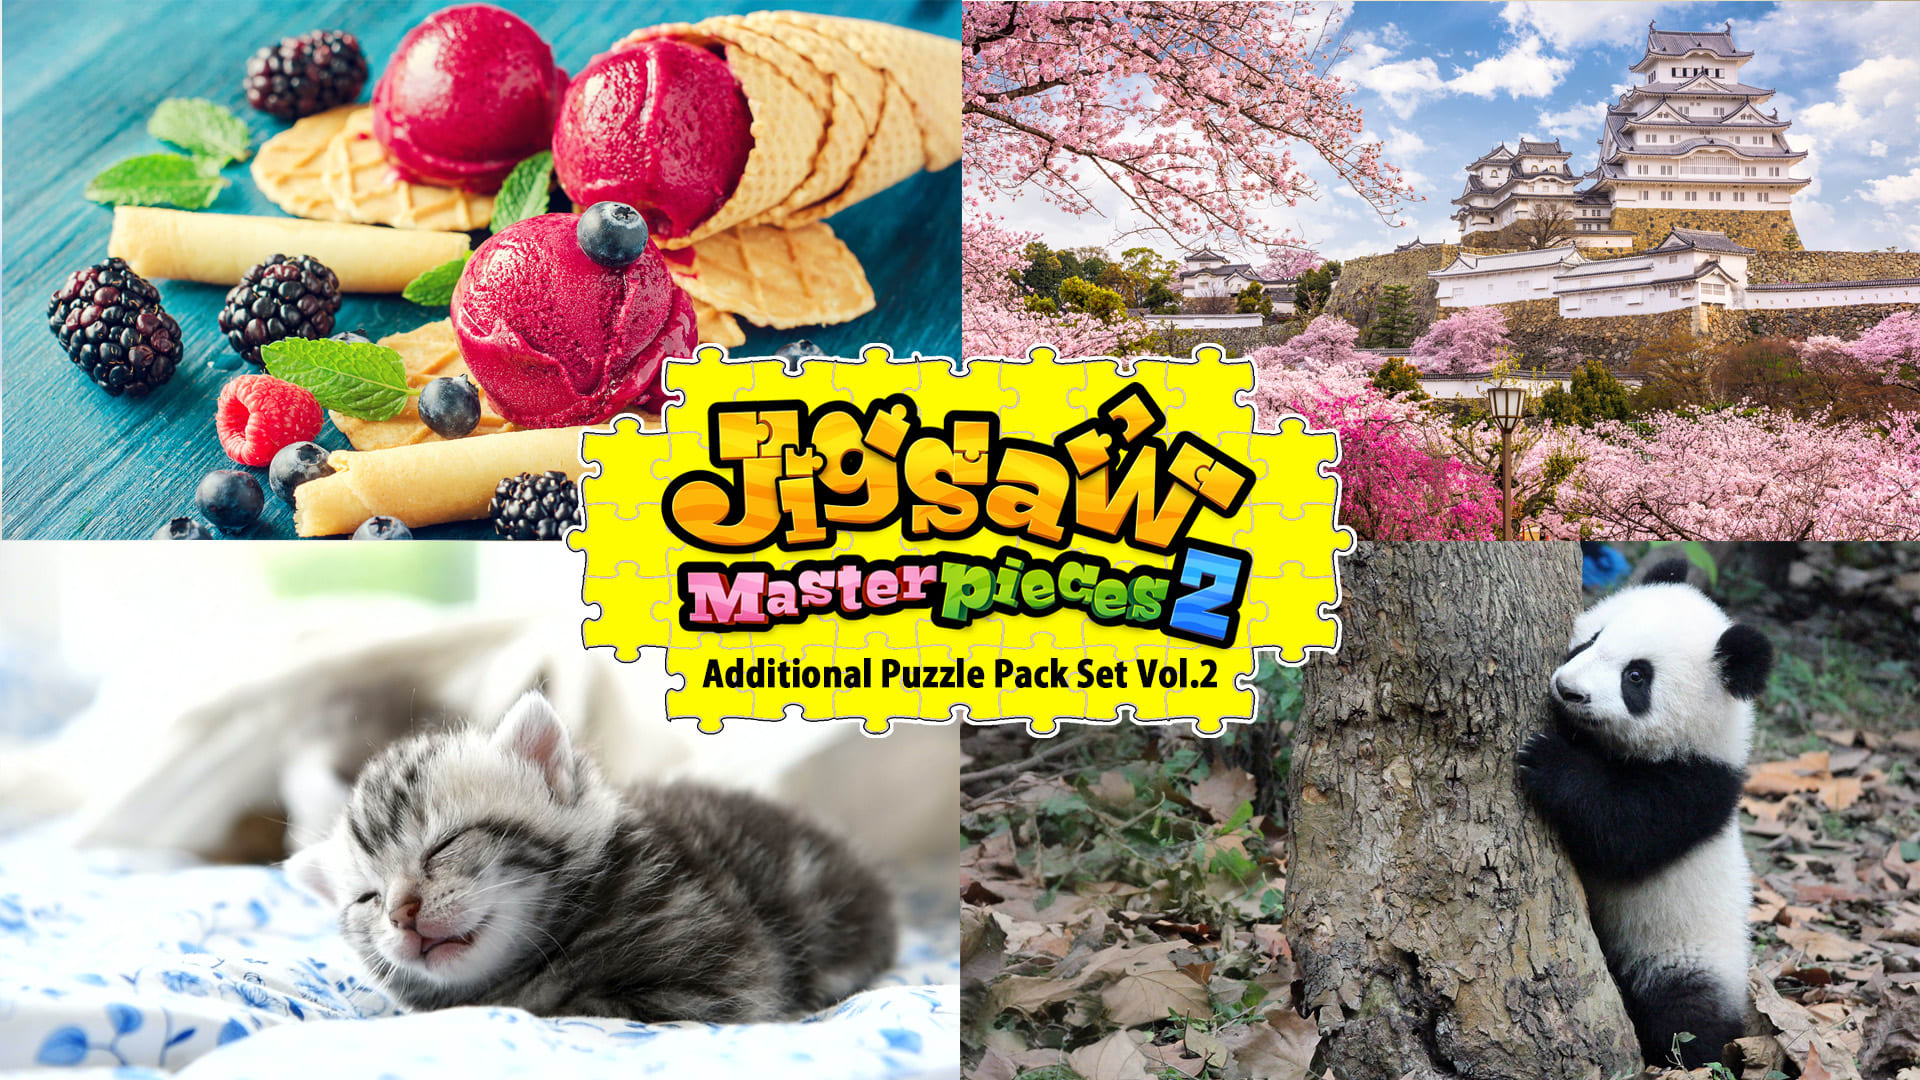 Additional Puzzle Pack Set Vol.2 1